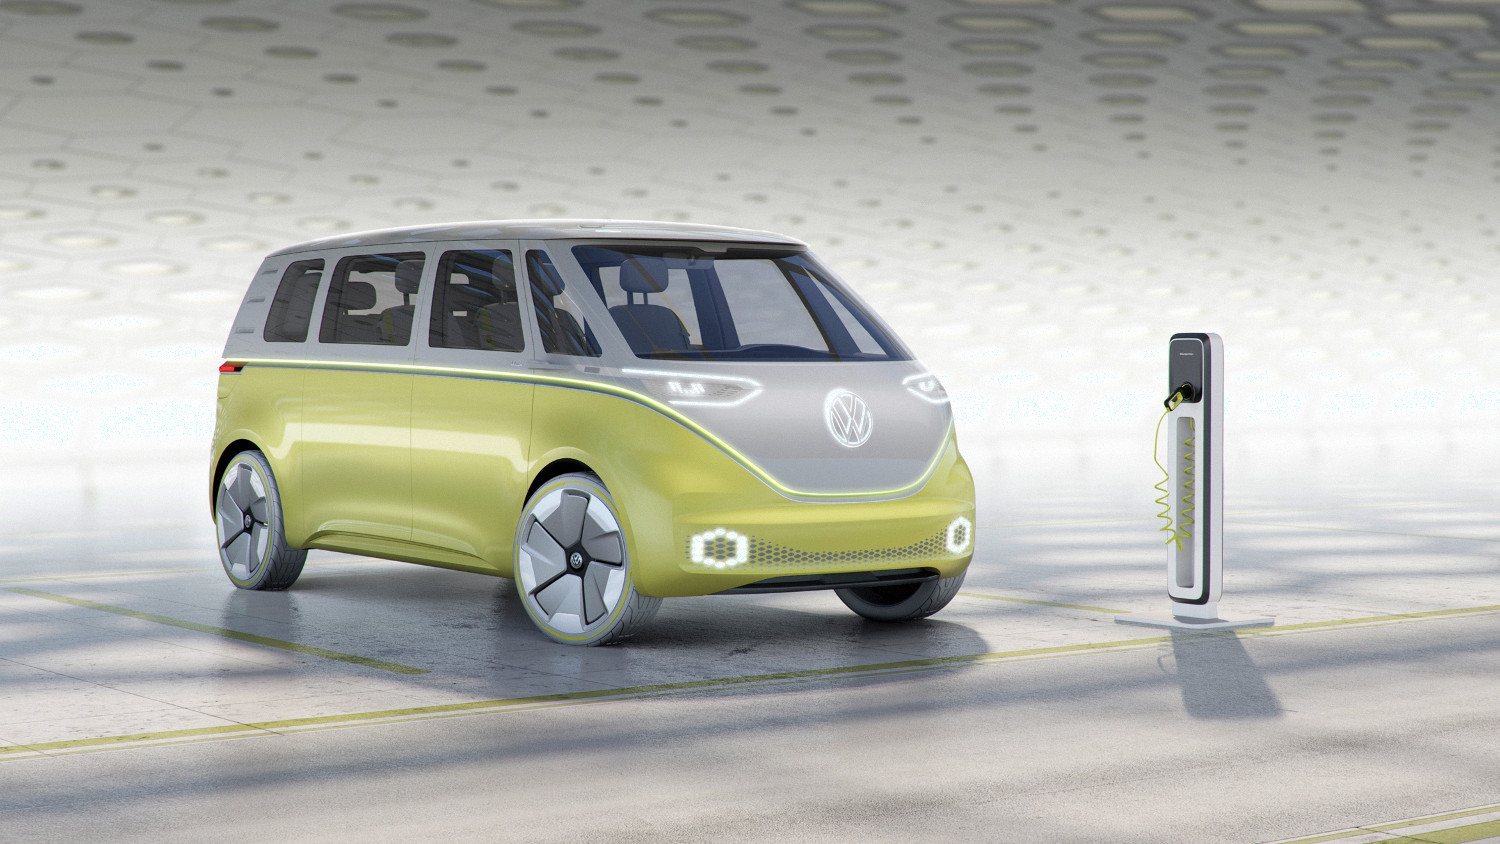 Volkswagen announced when it will begin selling its electric 